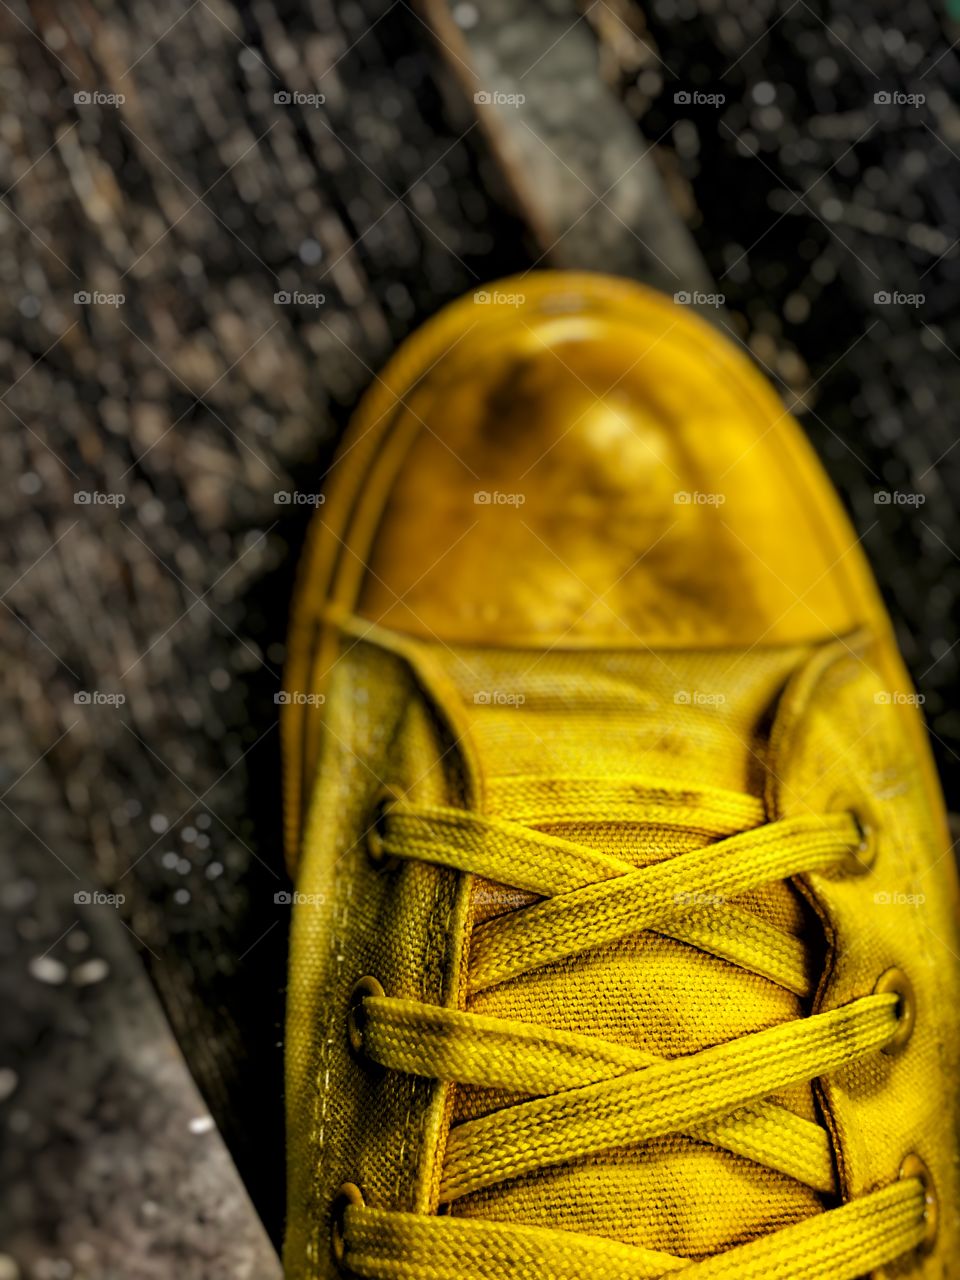 Dirty Shoes 